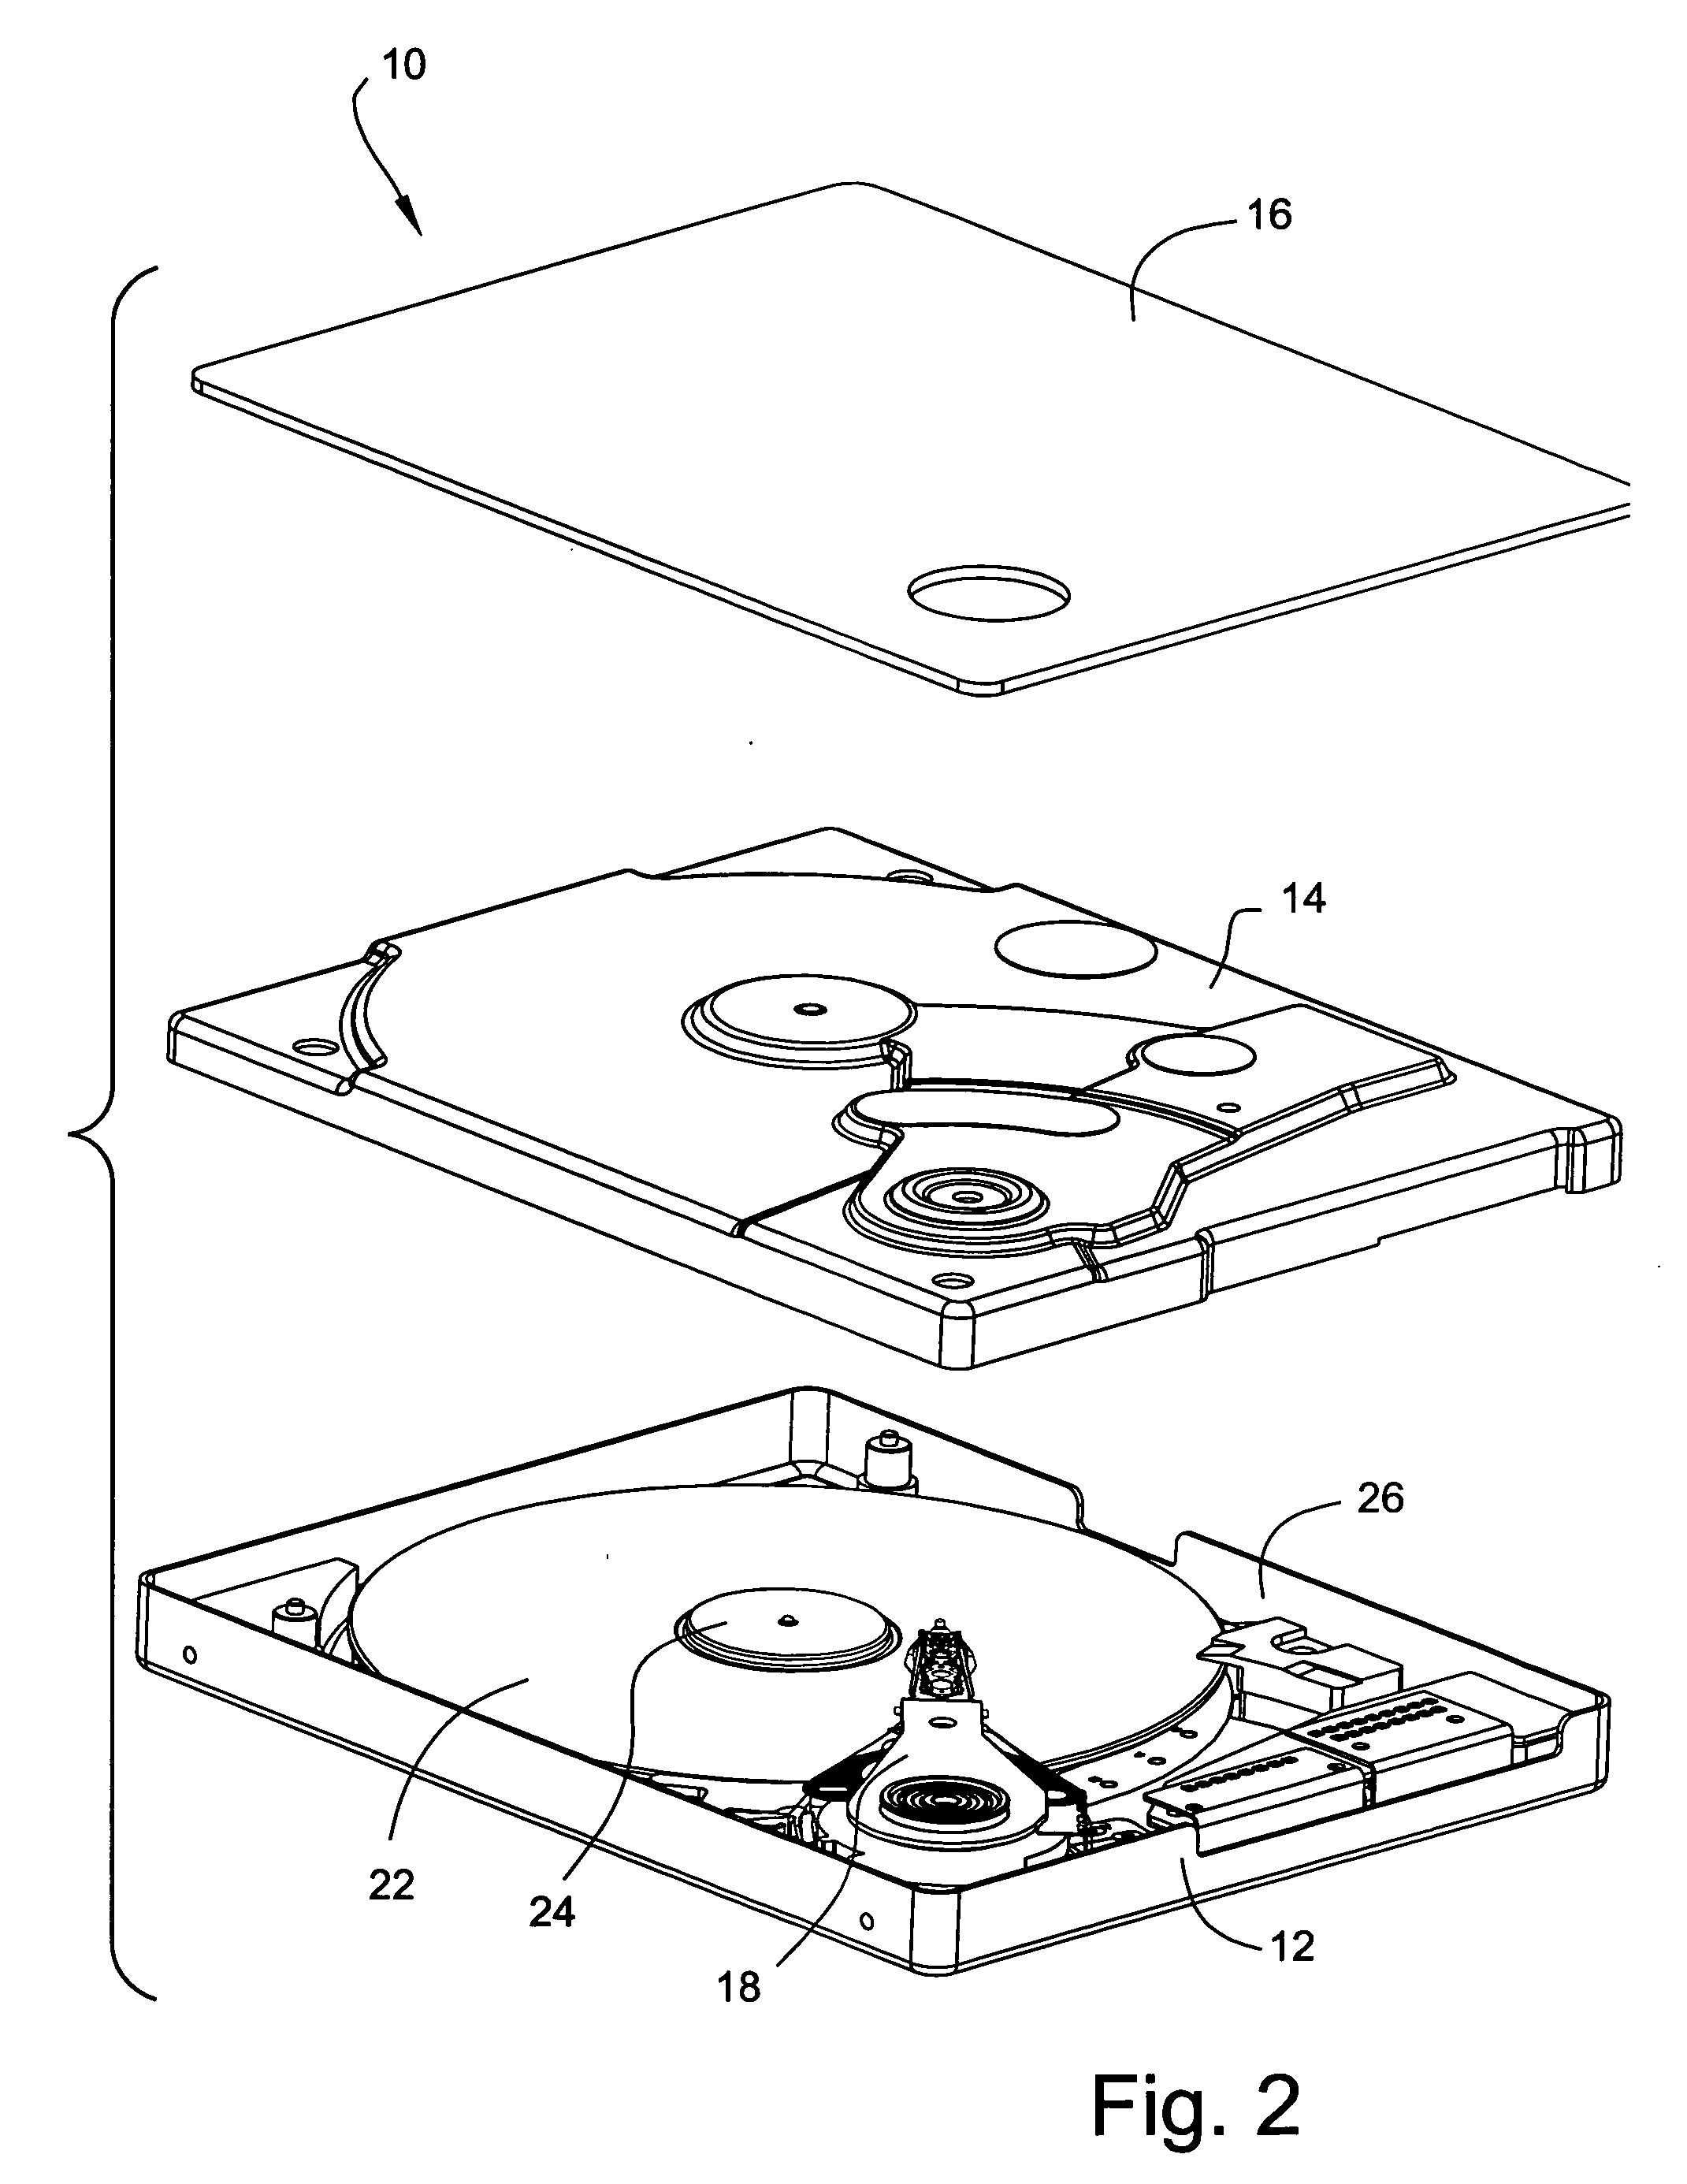 Soldering device and method for forming electrical solder connections in a disk drive unit